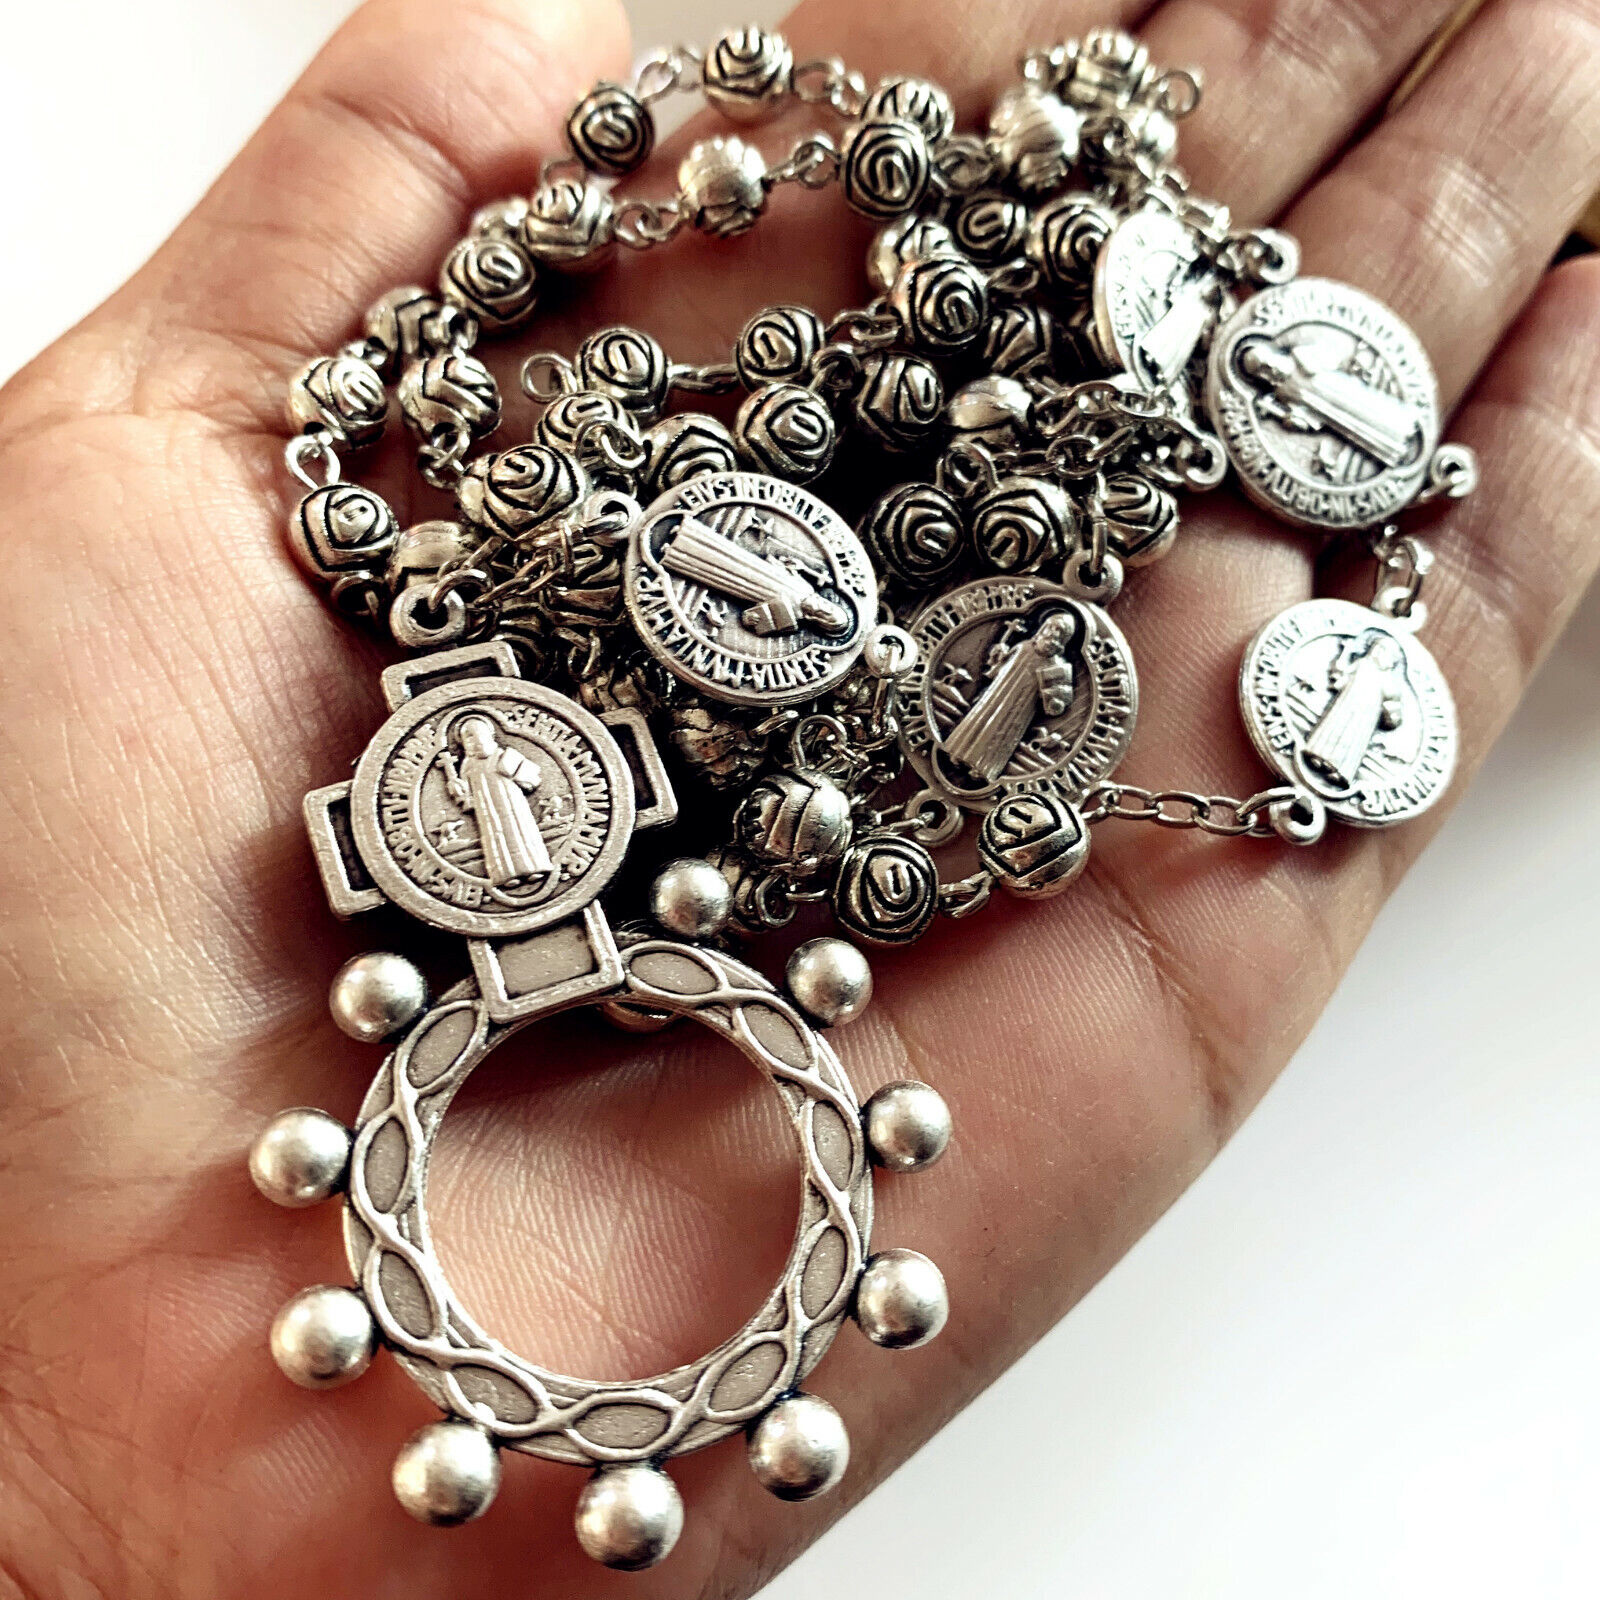 Vintage Silver Rose Beads Catholic St. Benedict Rosary Necklace Cross Gift